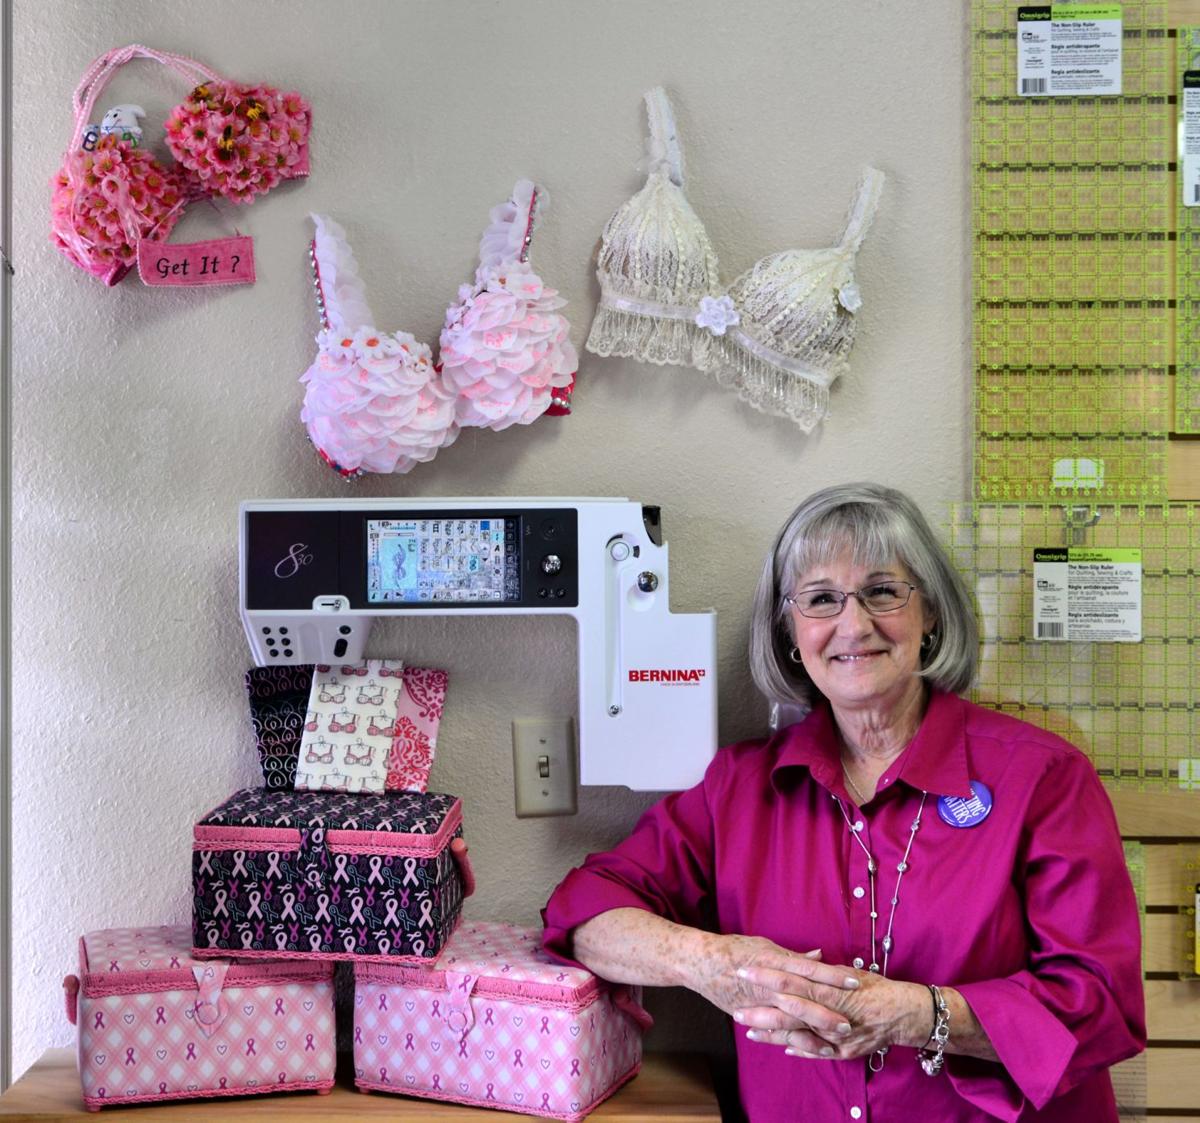 Decorate a bra and increase breast cancer awareness